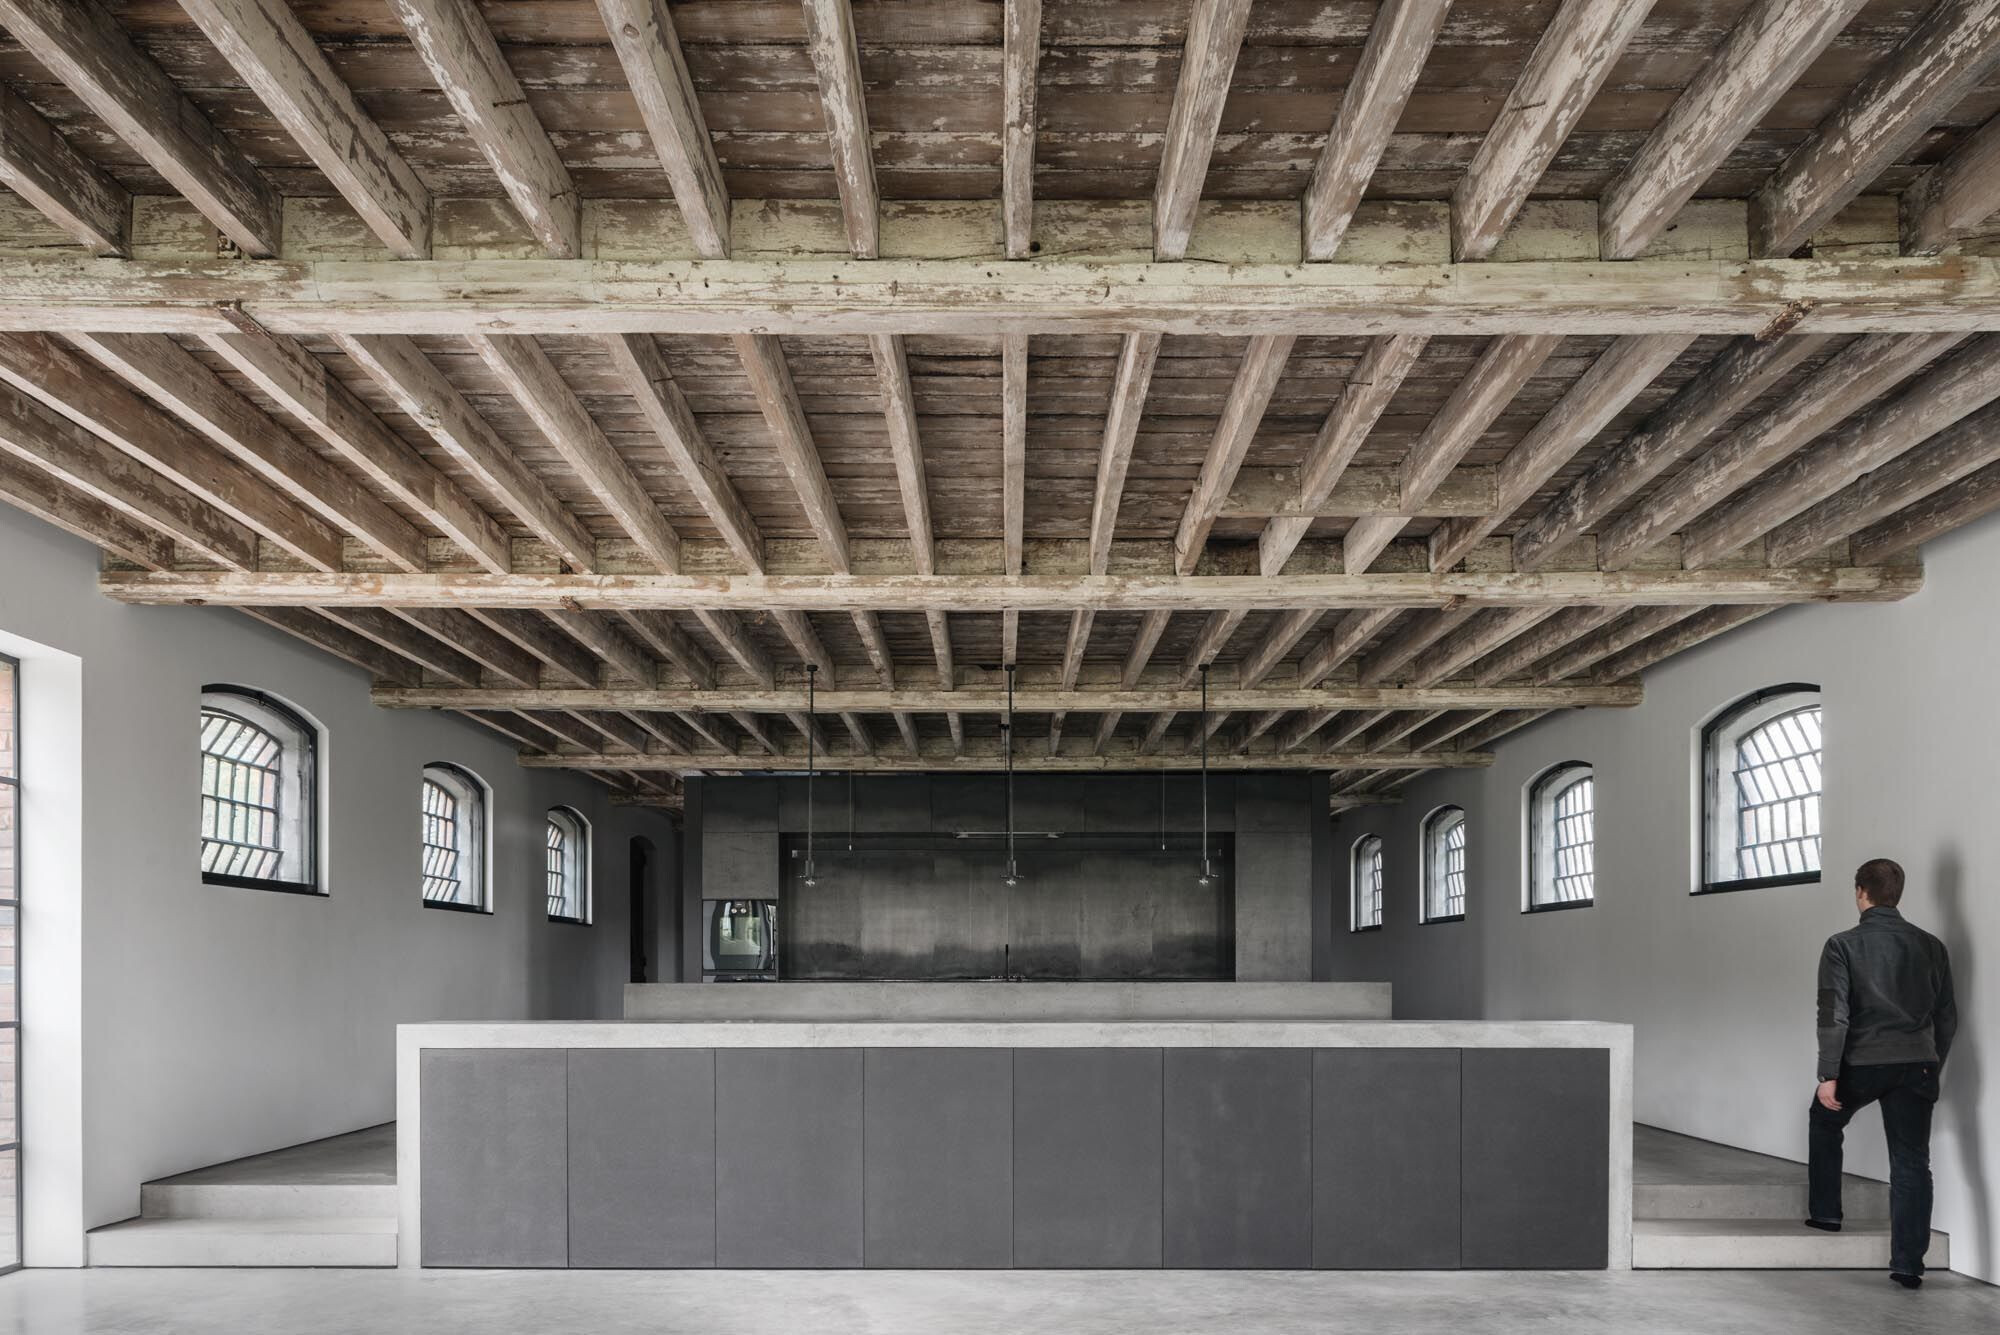 photo_credit photo : Simone Bossi | project : Brick Barns by McLaren.Excell 